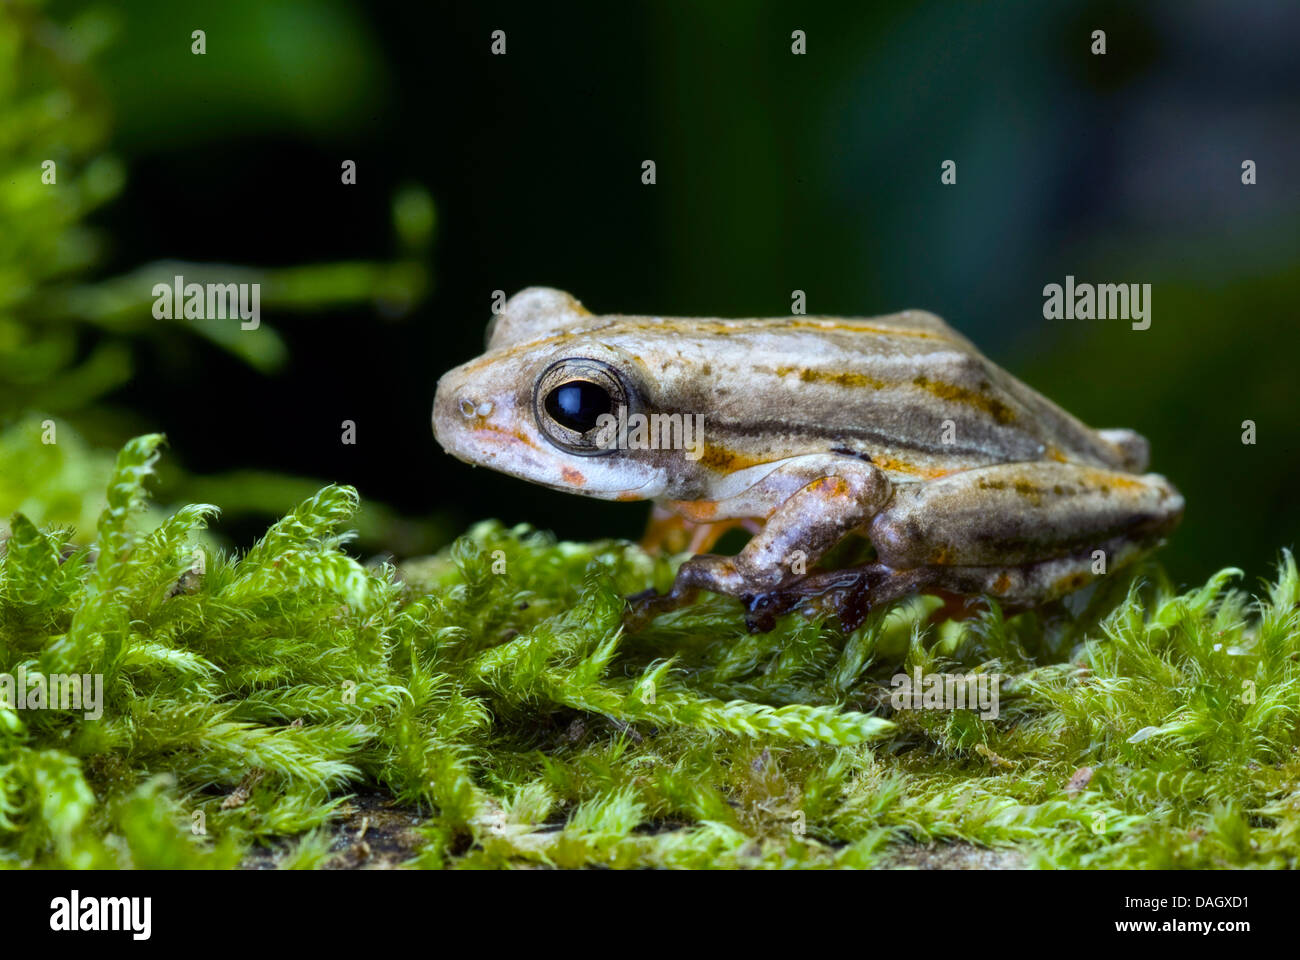 Marbled Reed Frog, Painted Reed Frog (Hyperolius marmoratus), on moss Stock Photo